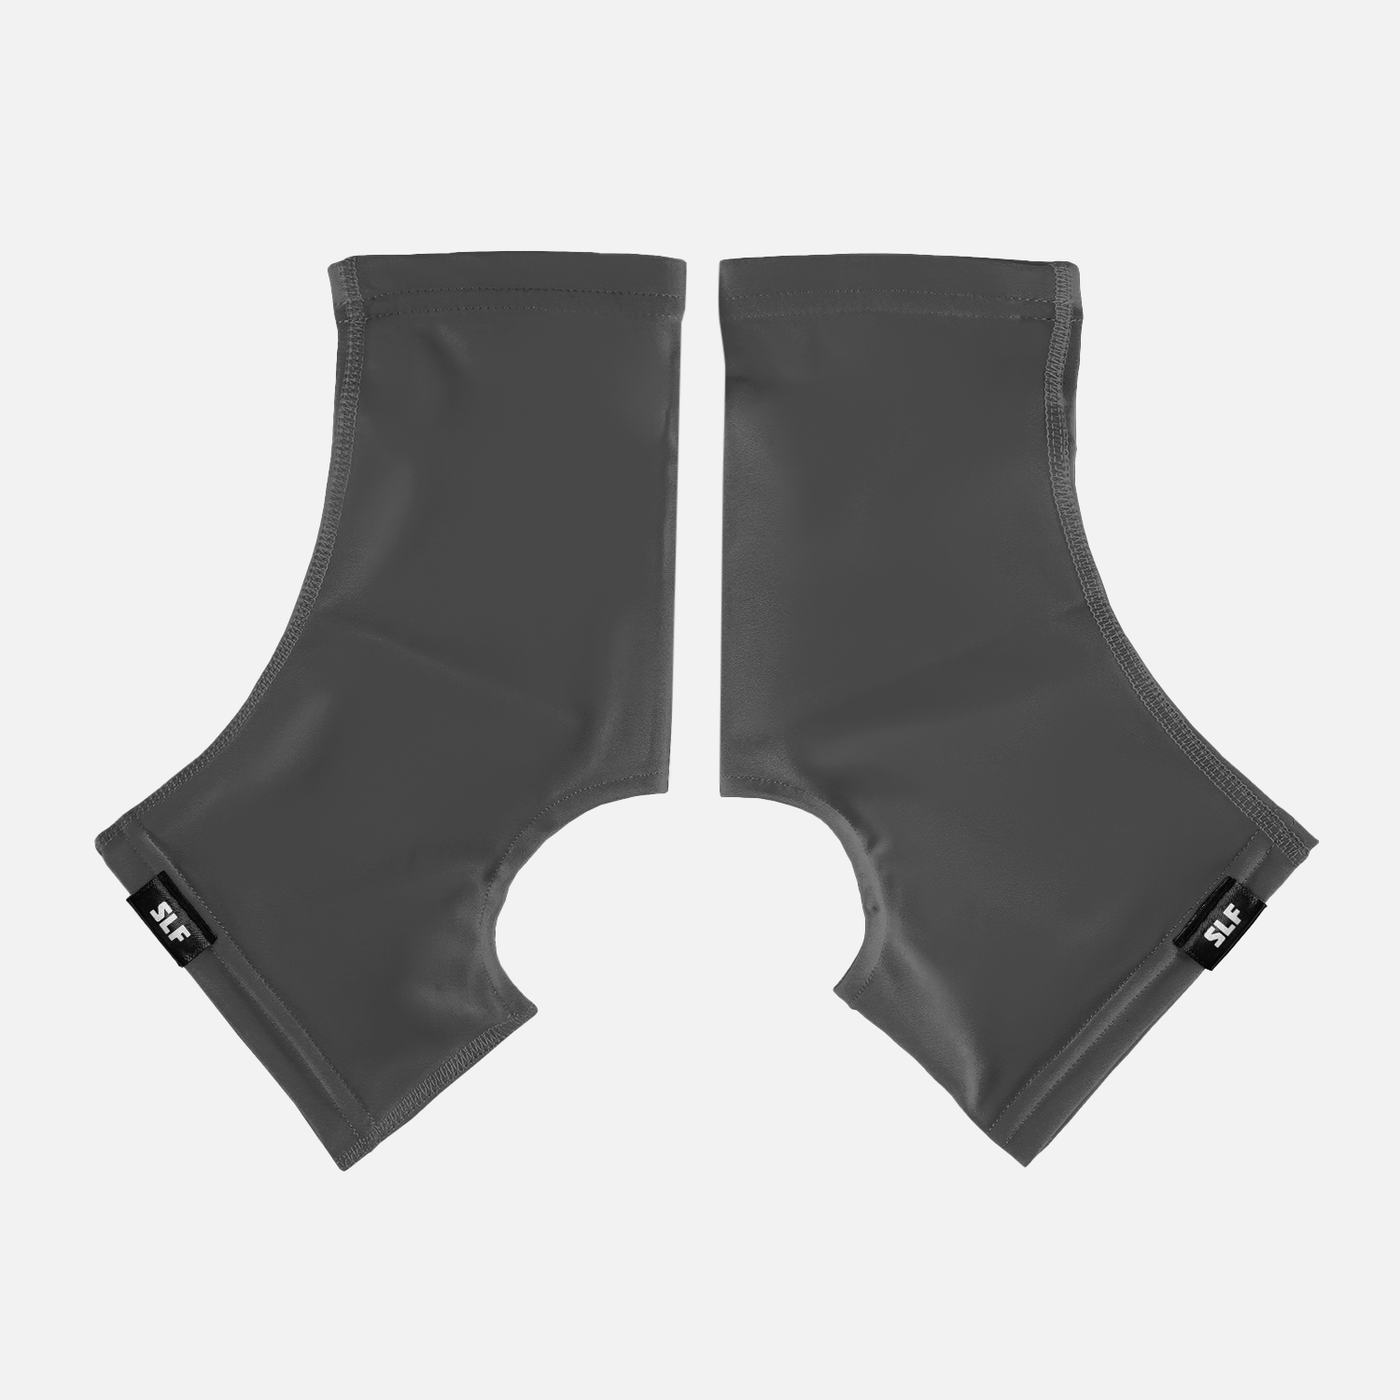 Hue Dark Gray Spats / Cleat Covers